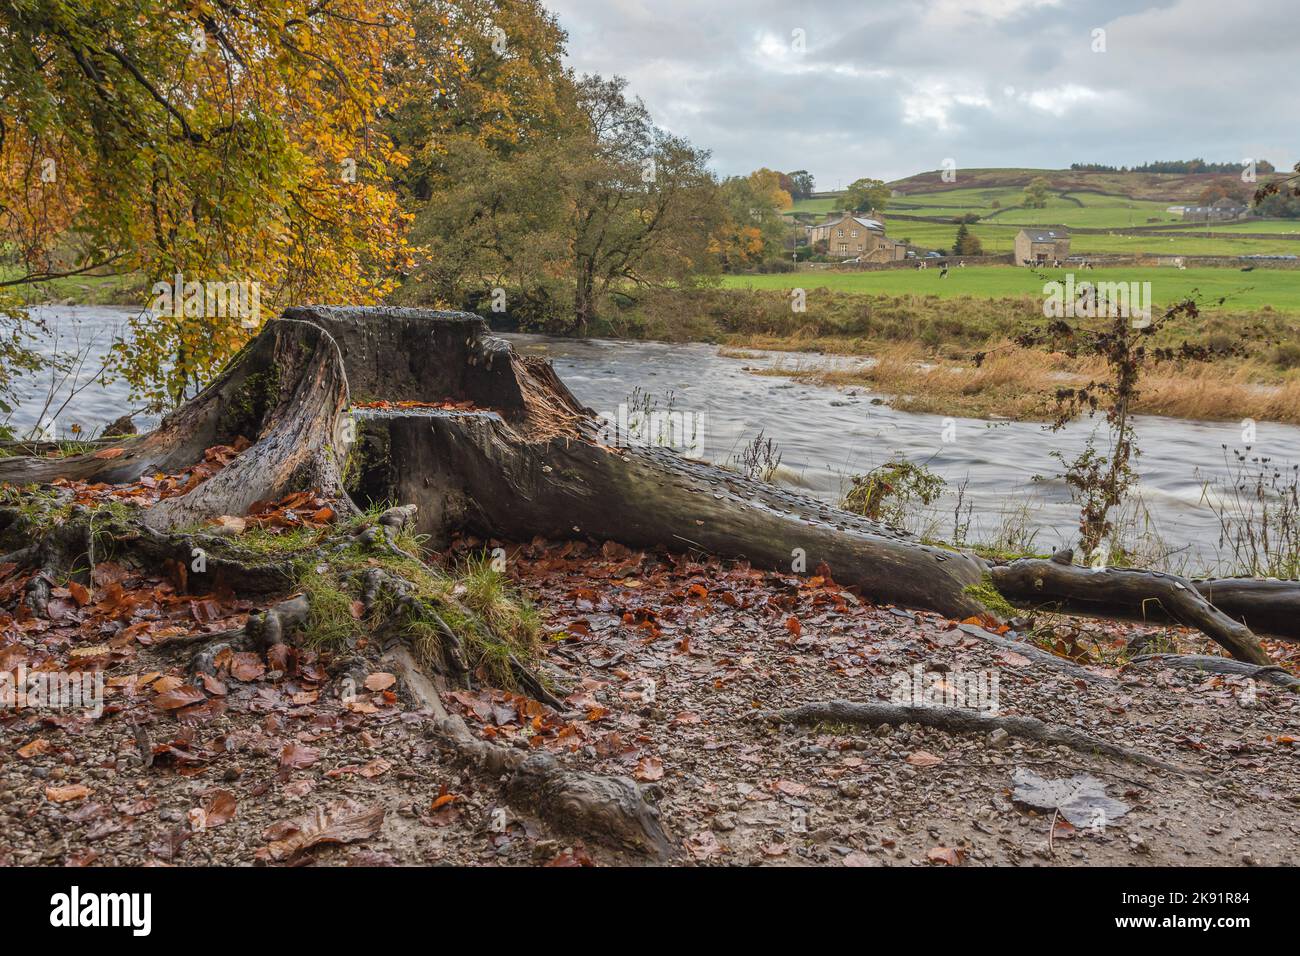 A seat made from an old tree stump seen covered in coins on the side of the River Wharfe at Hebden. Stock Photo